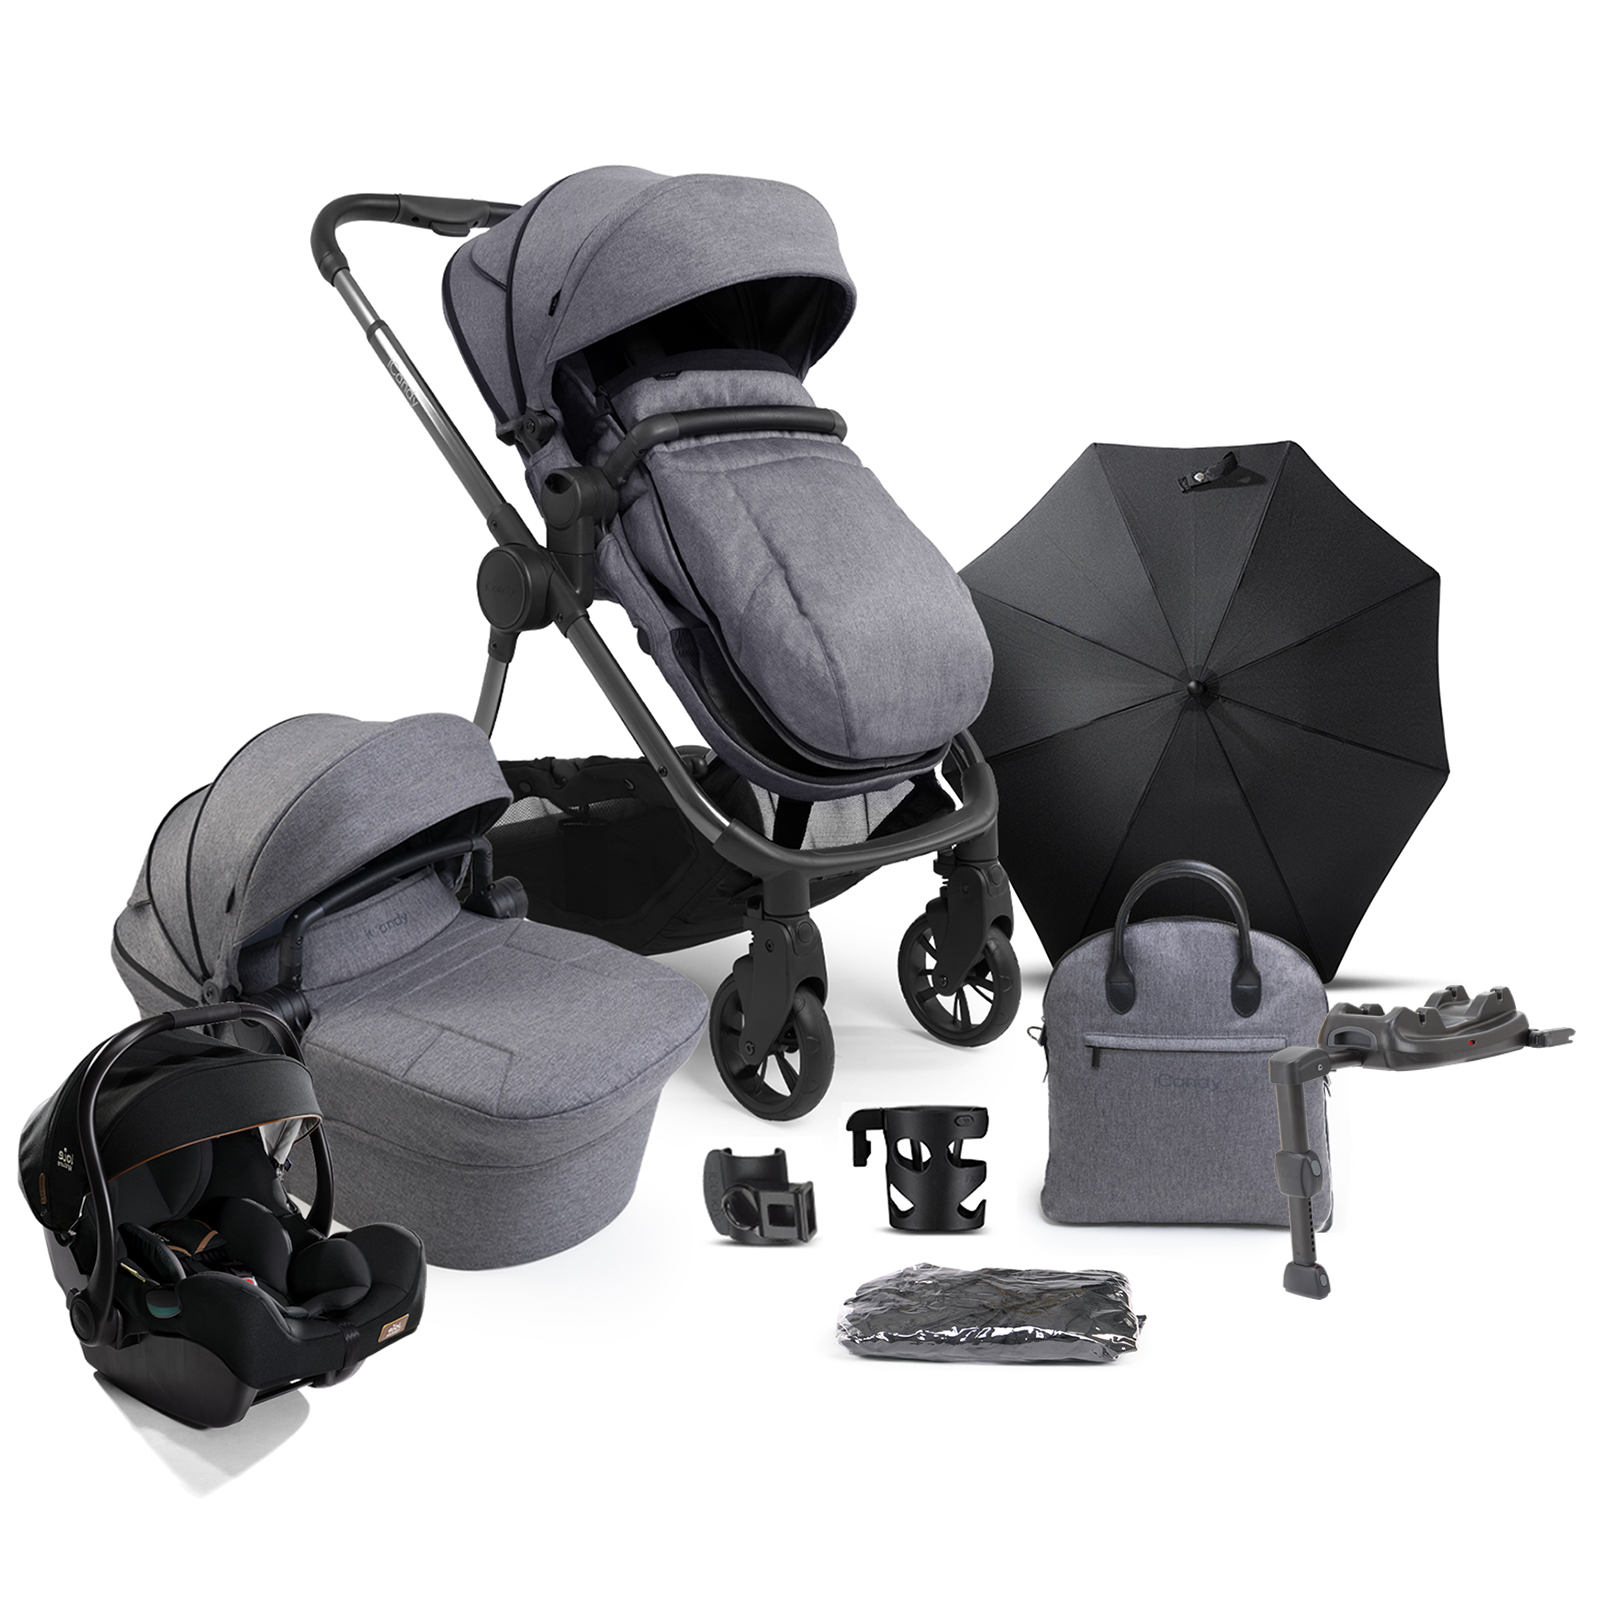 iCandy Lime Lifestyle (i-Jemini) Travel System Summer Bundle with LX 2 ISOFIX - Charcoal